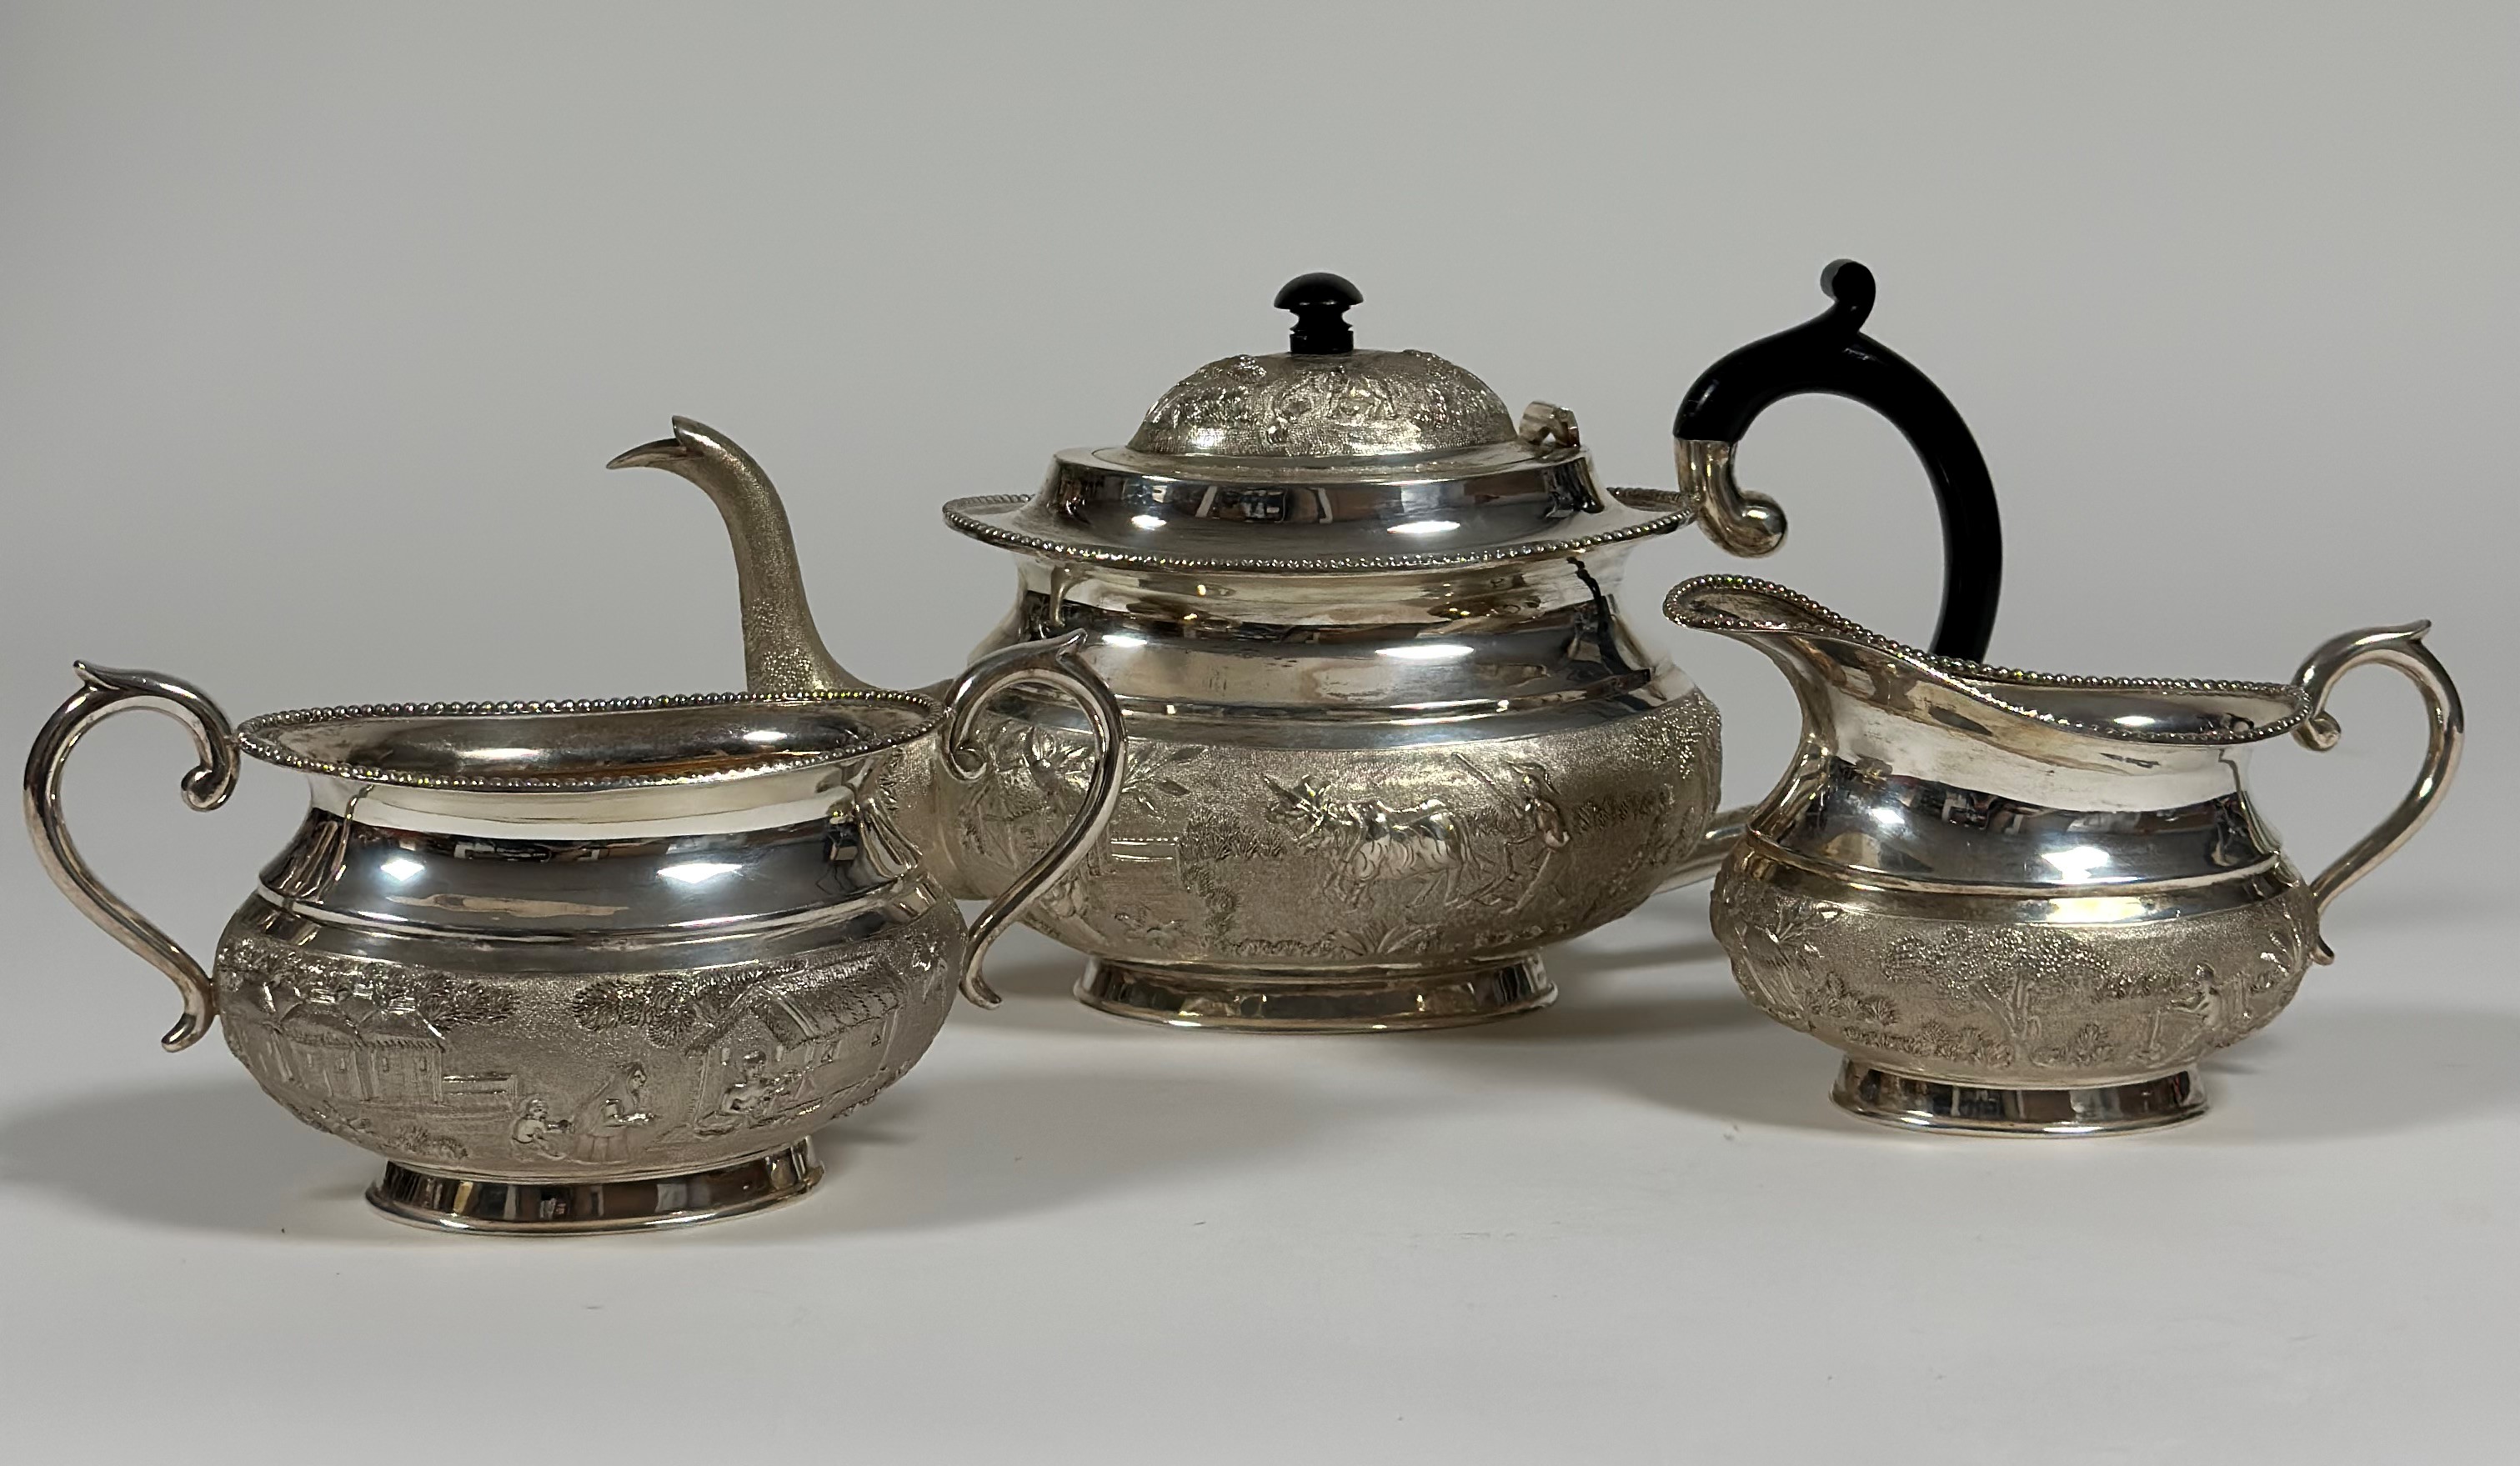 A South-East Asian sterling silver three piece tea service, mid-20th century, each piece of oval